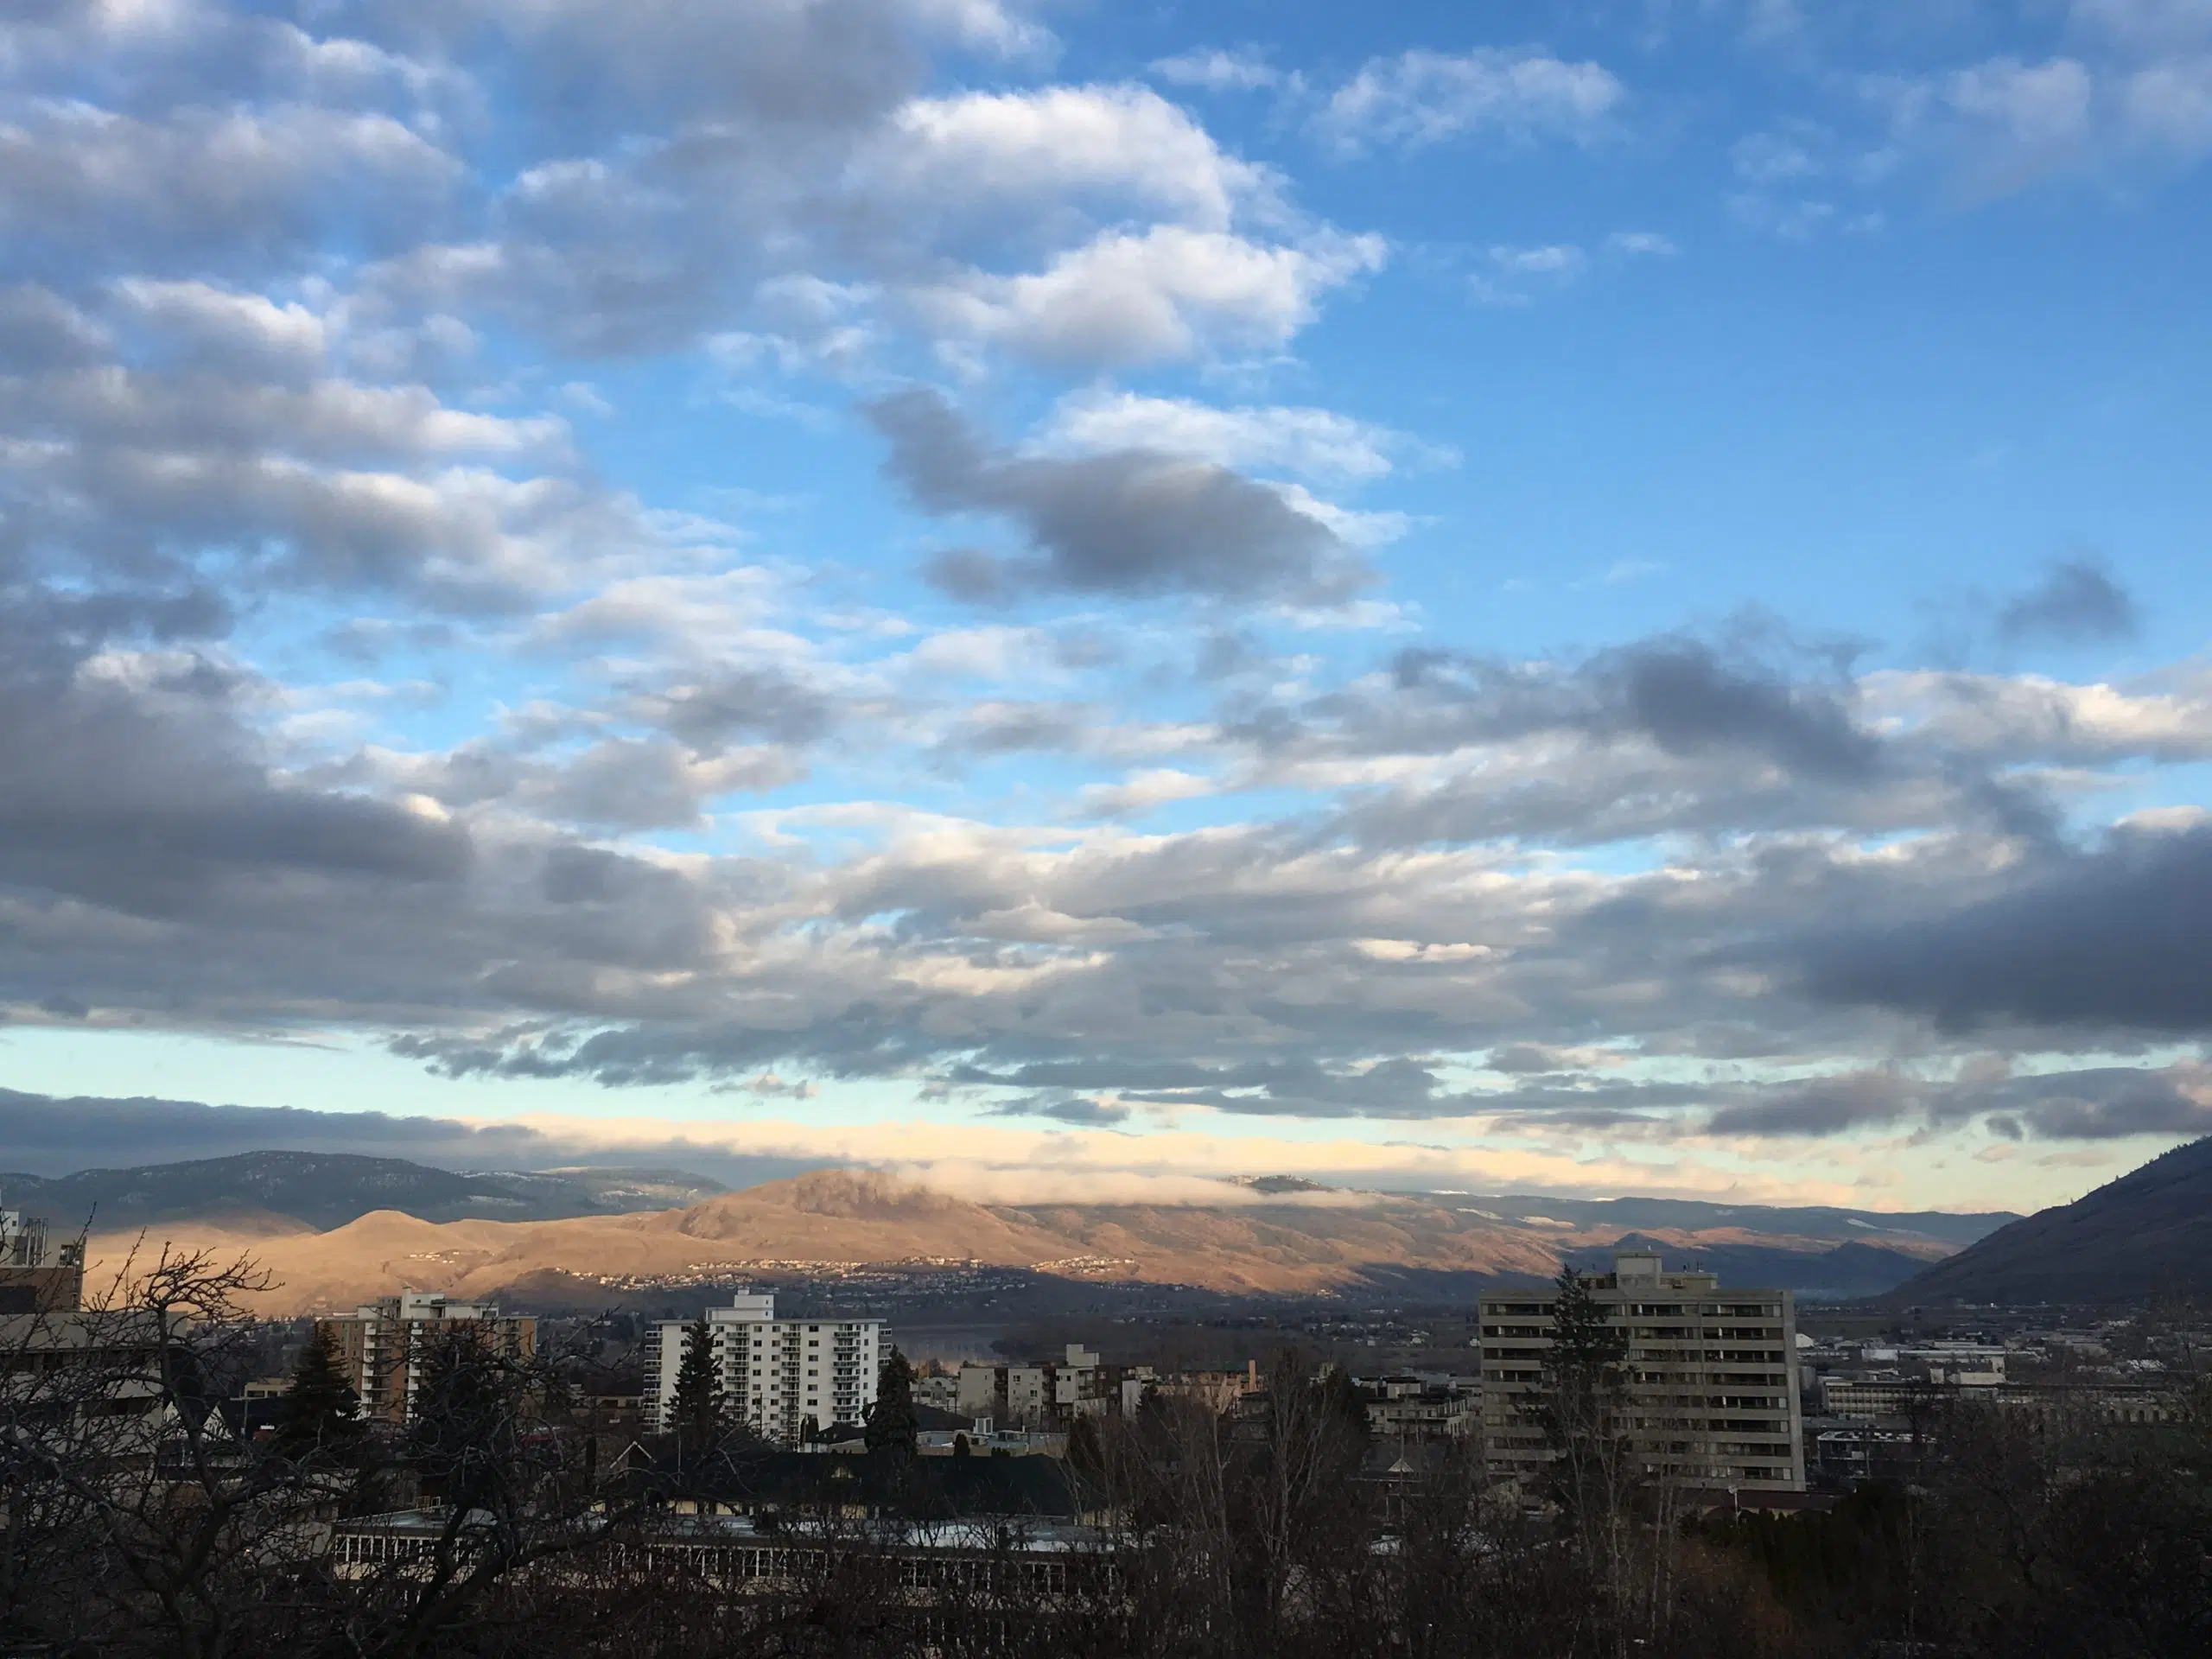 Kamloops appears to be just as popular as Kelowna, if you look to the number of annual tourists